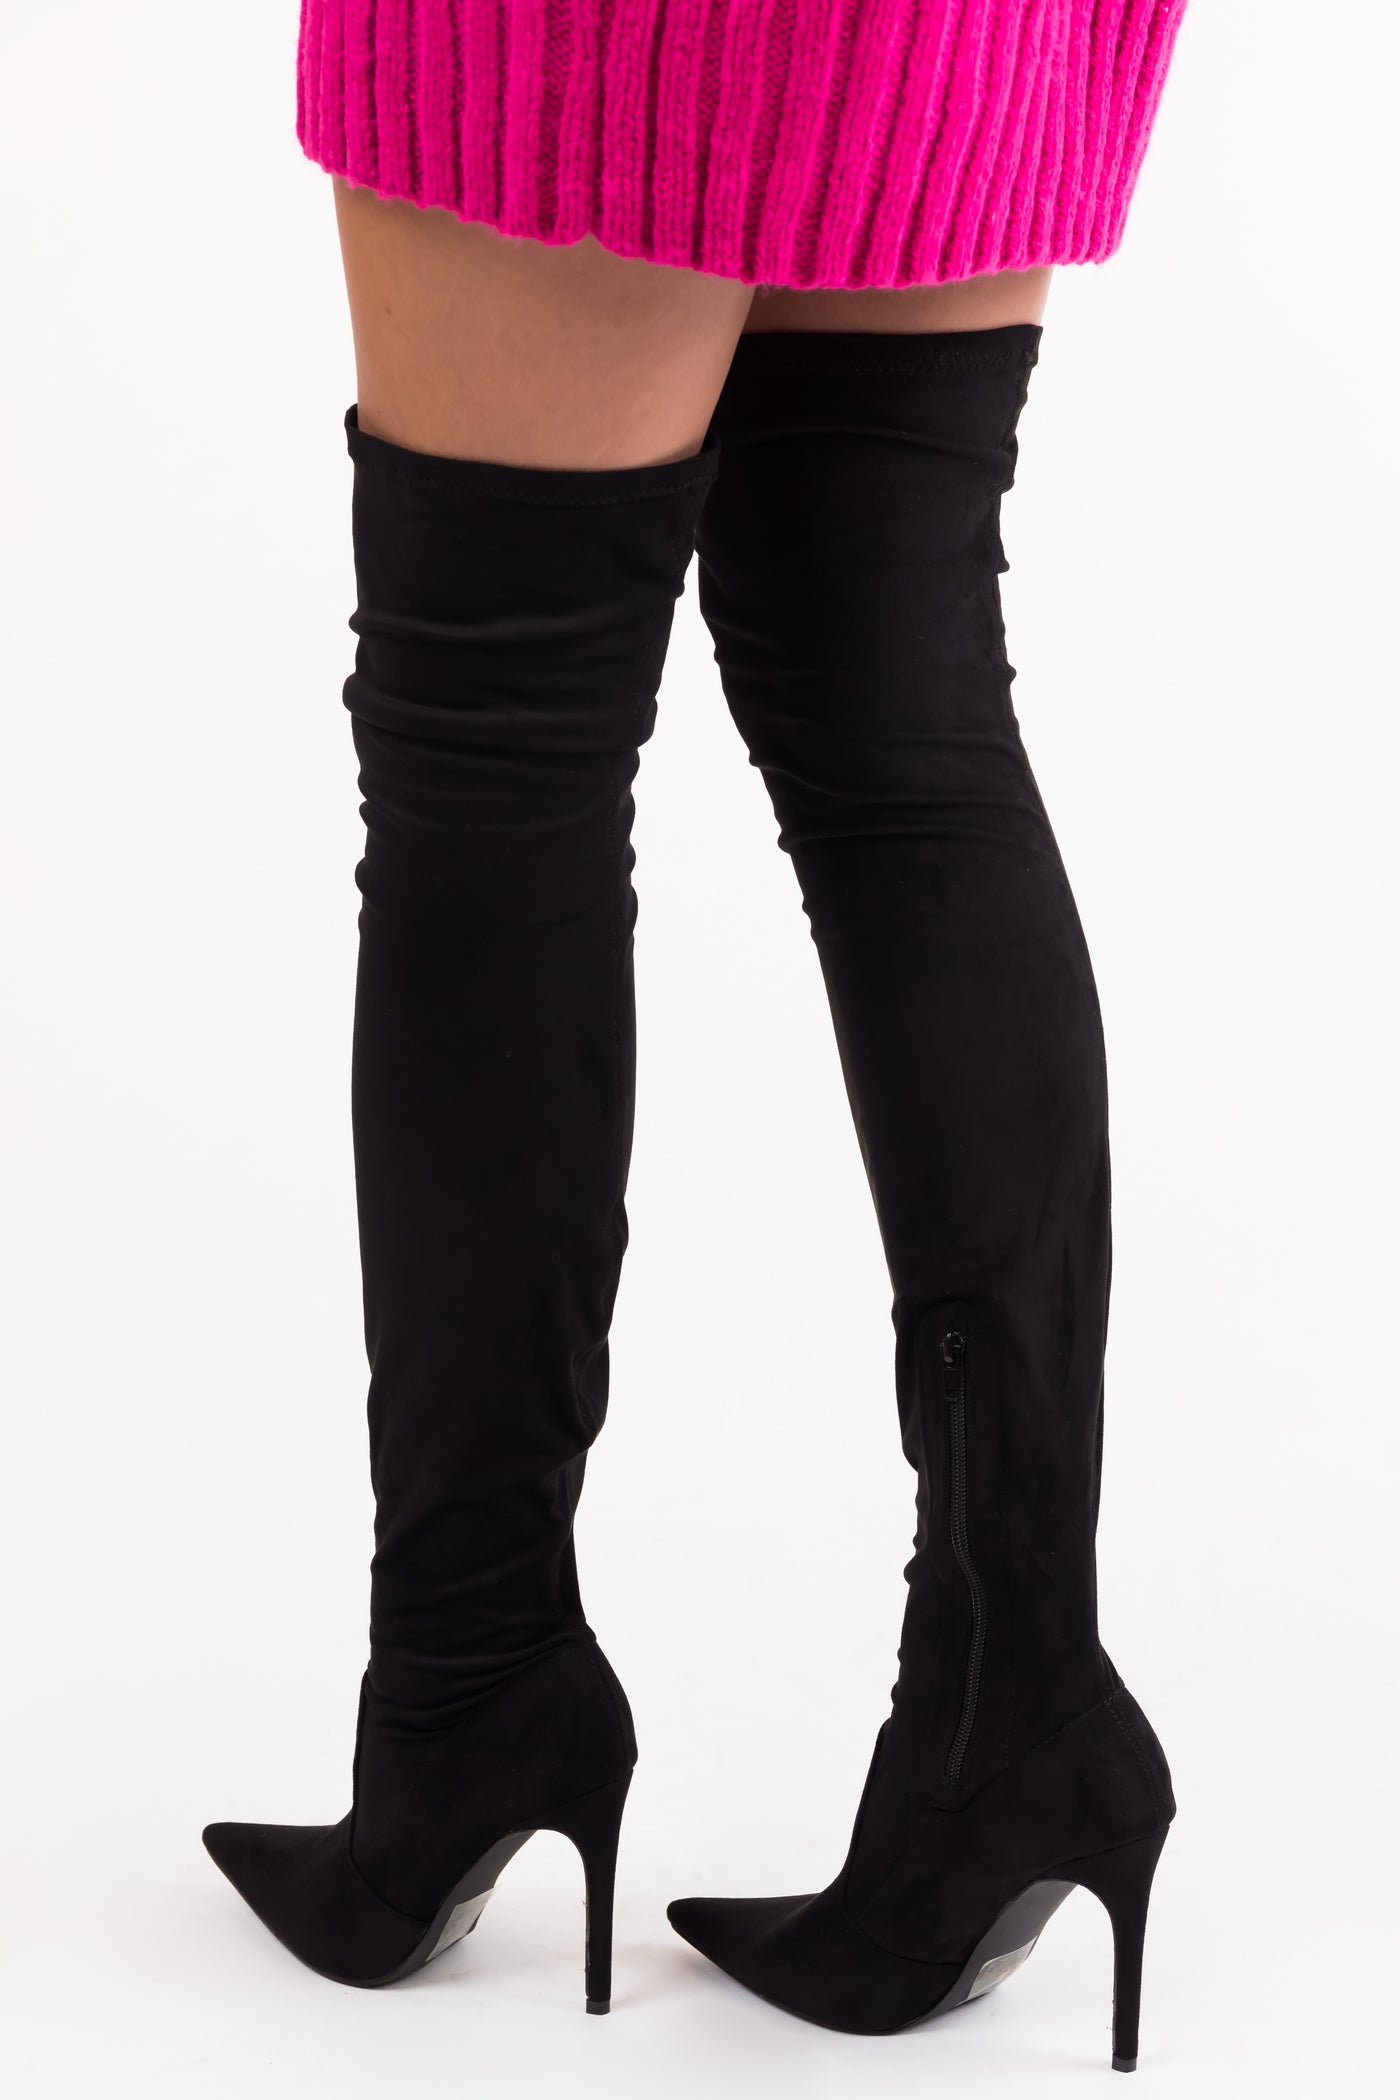 Black Suede Pointy Toe Thigh High Heel Boots